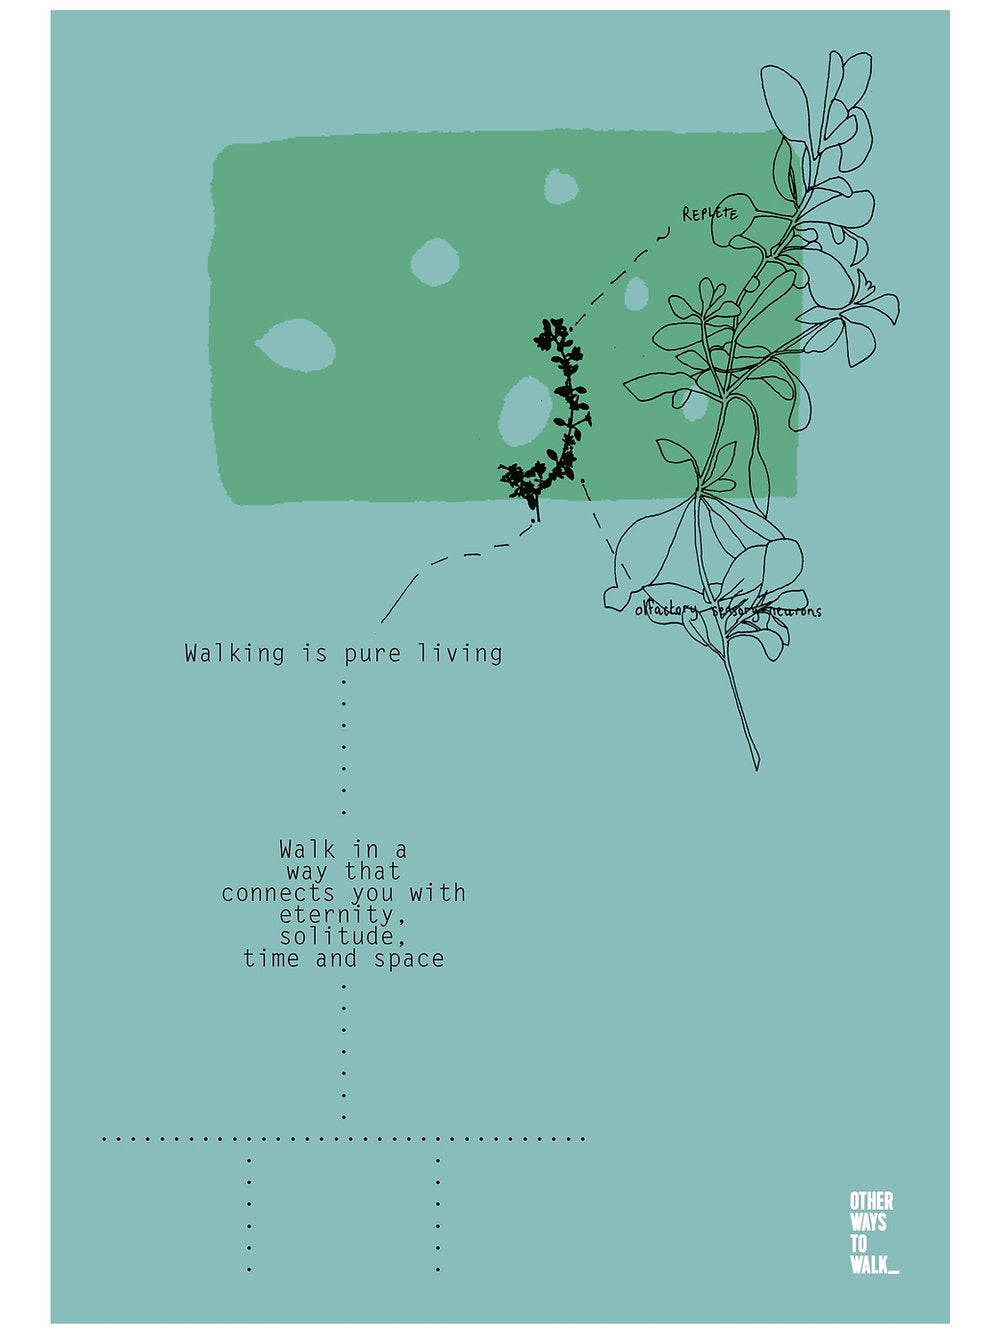 Walking is Pure Living  Print by Other Ways to Walk